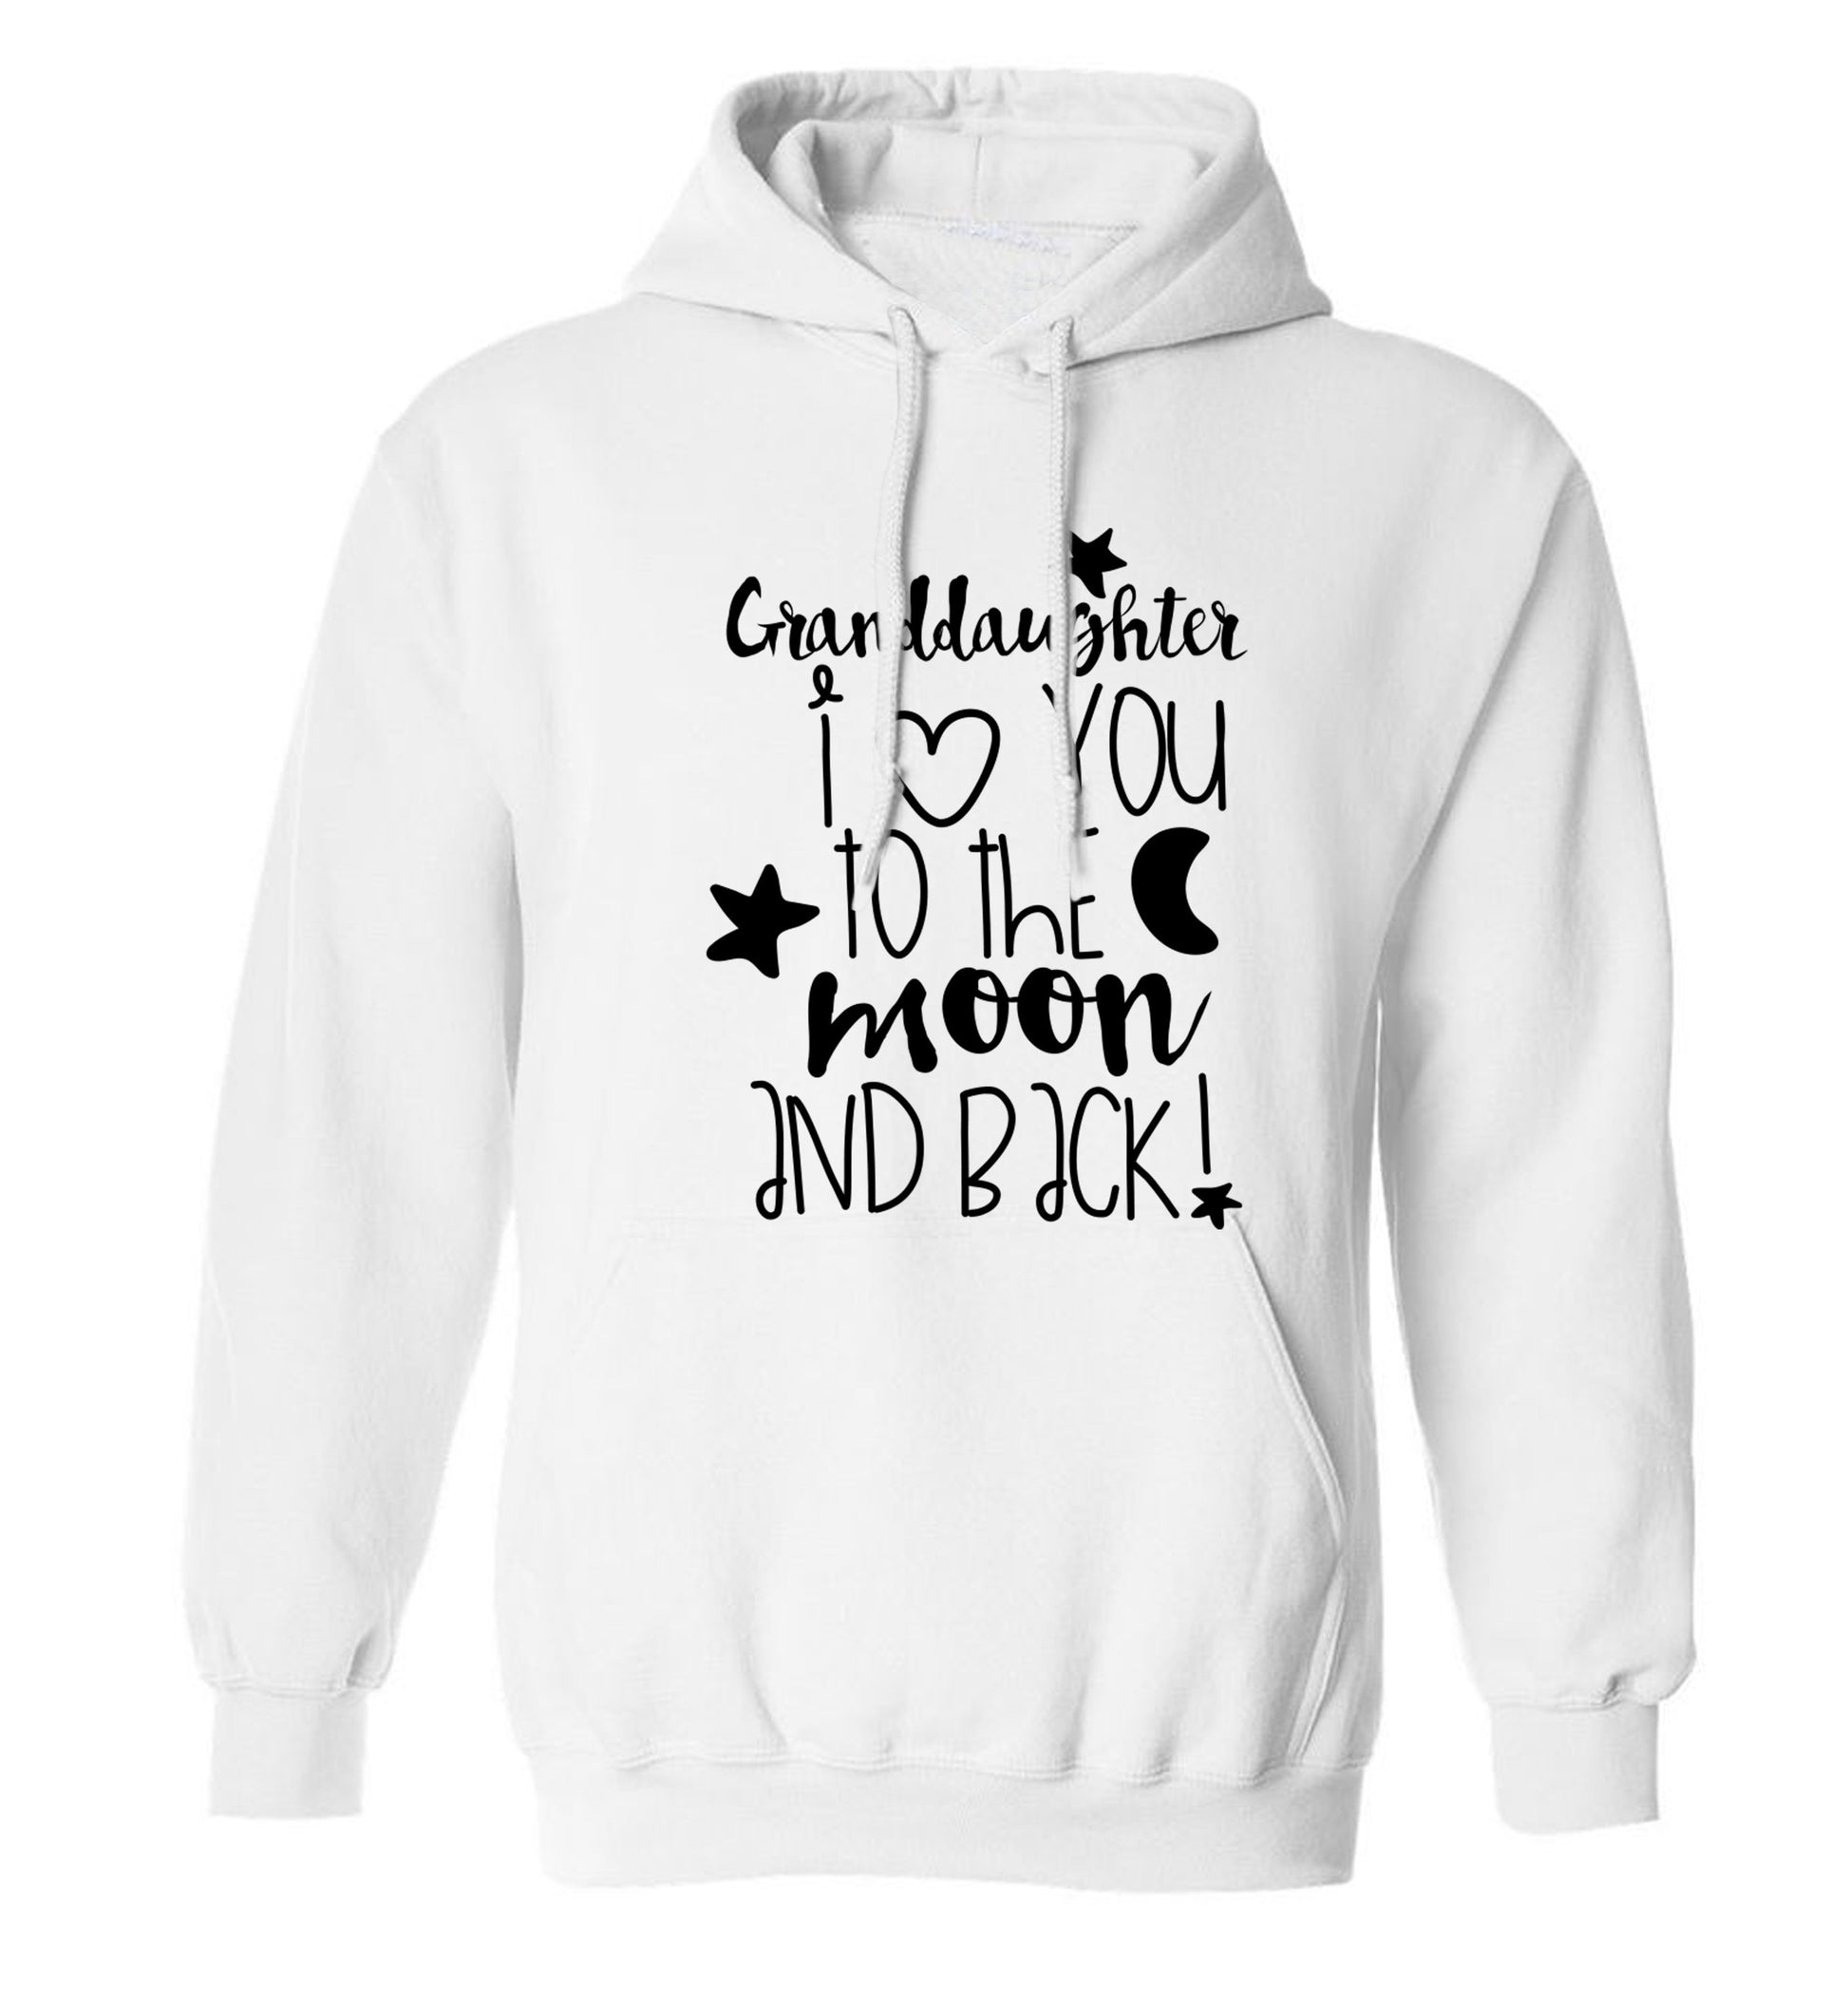 Granddaughter I love you to the moon and back adults unisex white hoodie 2XL